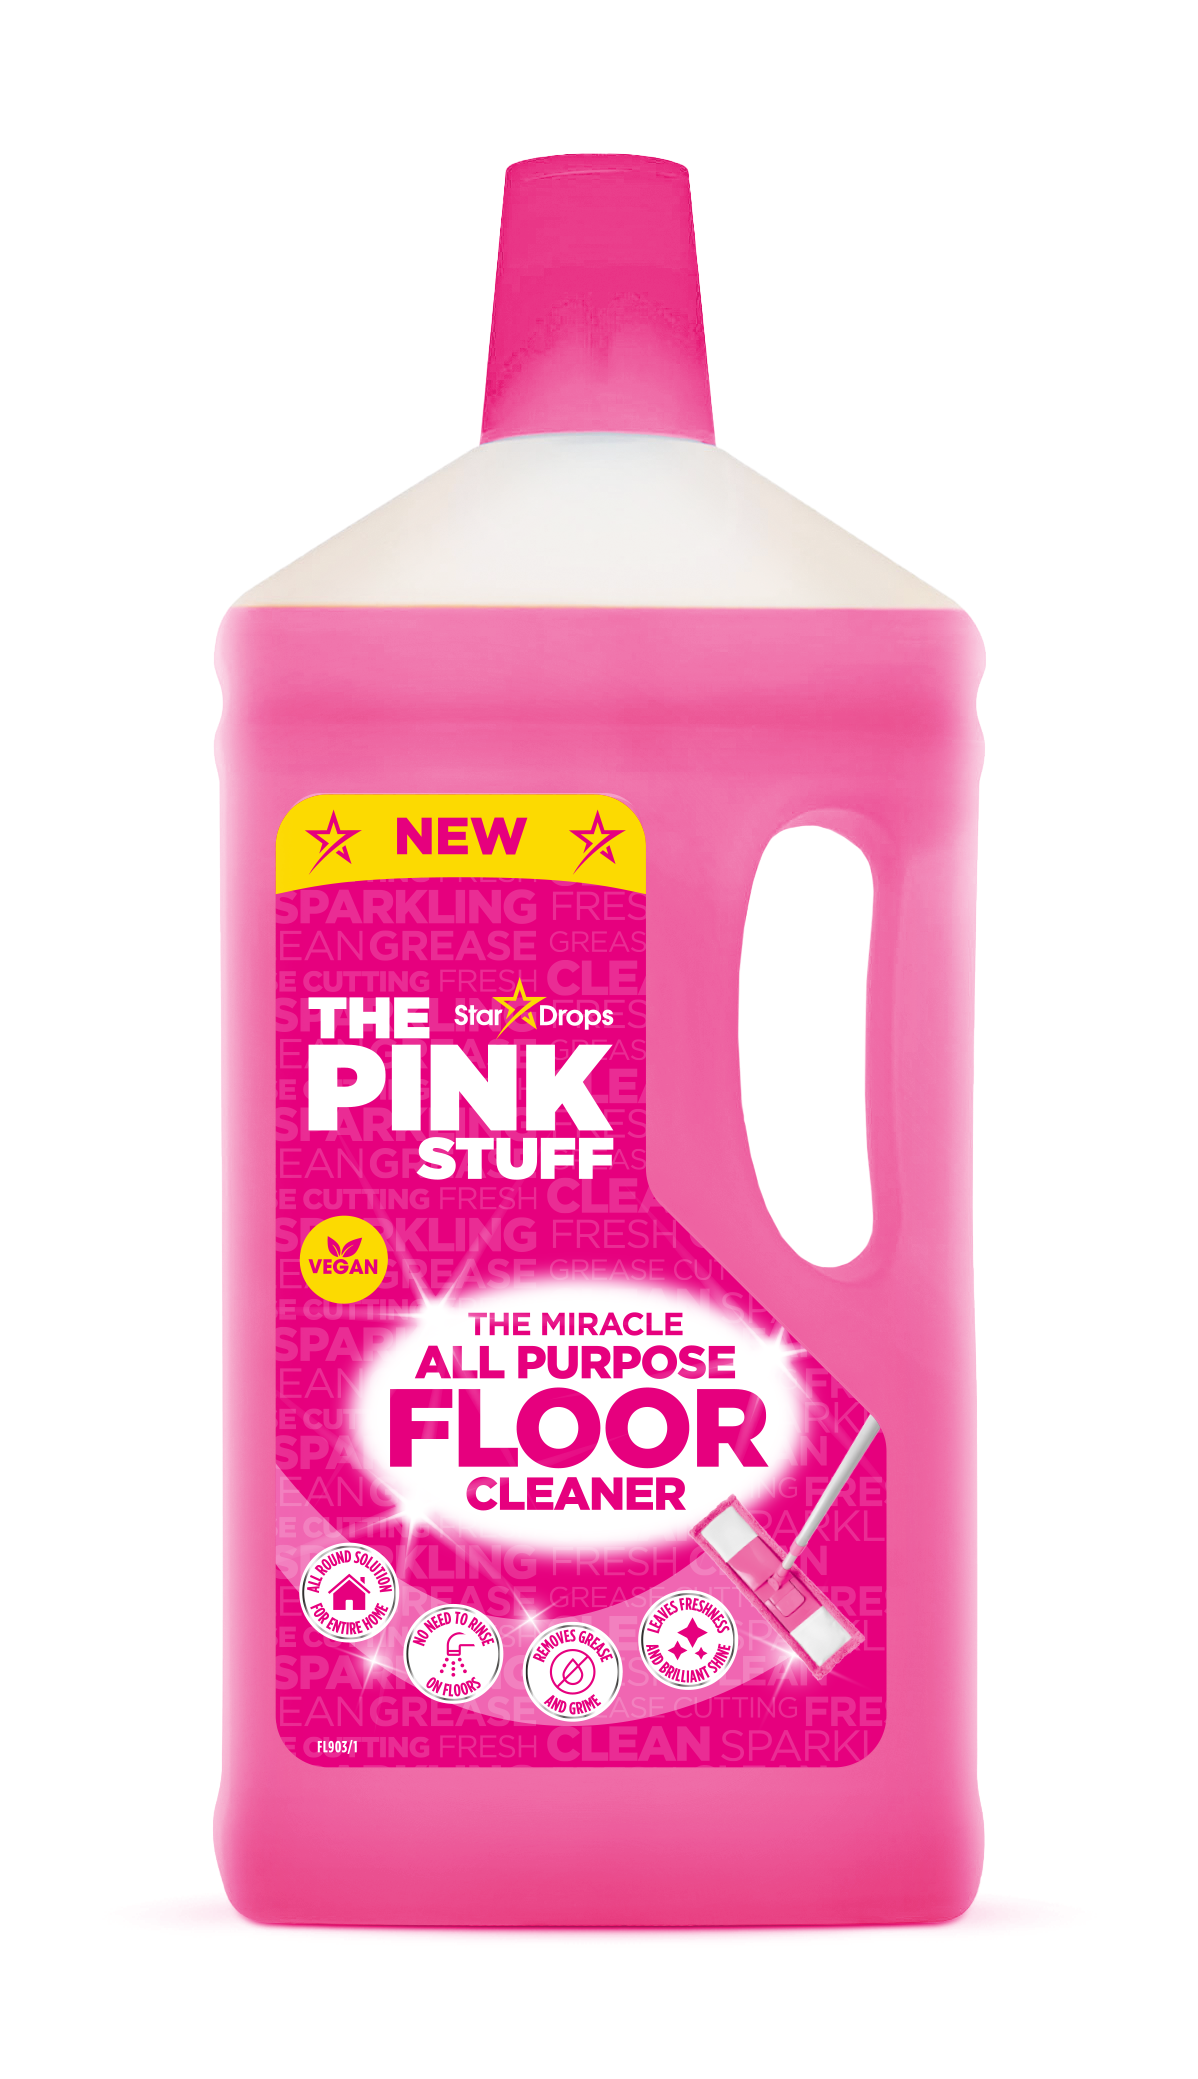 THE PINK STUFF Miracle All Purpose Floor Cleaner 1 liter